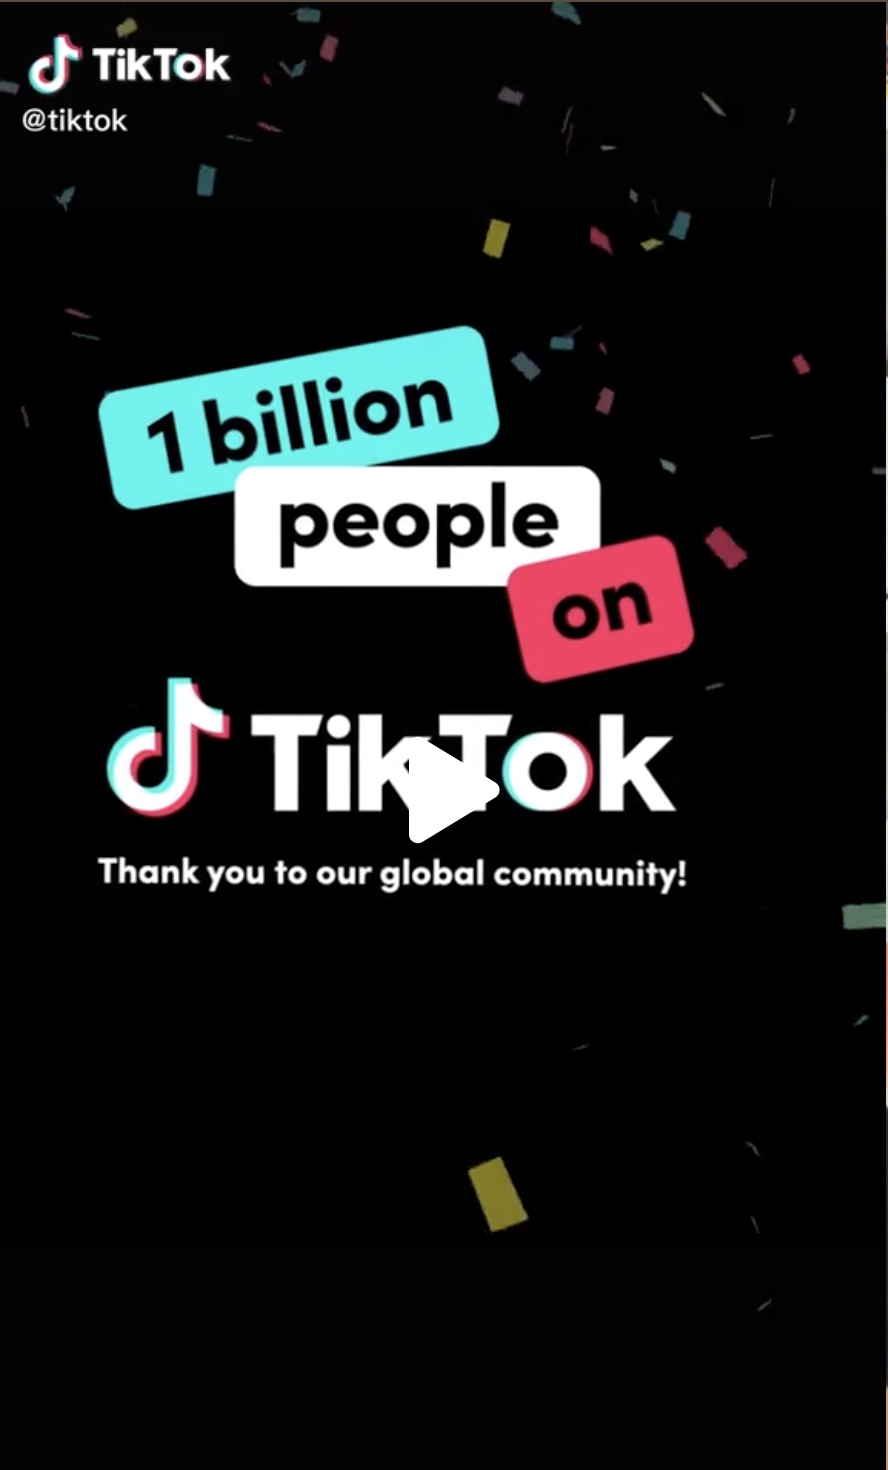 TikTok catapults to 1 billion monthly active users